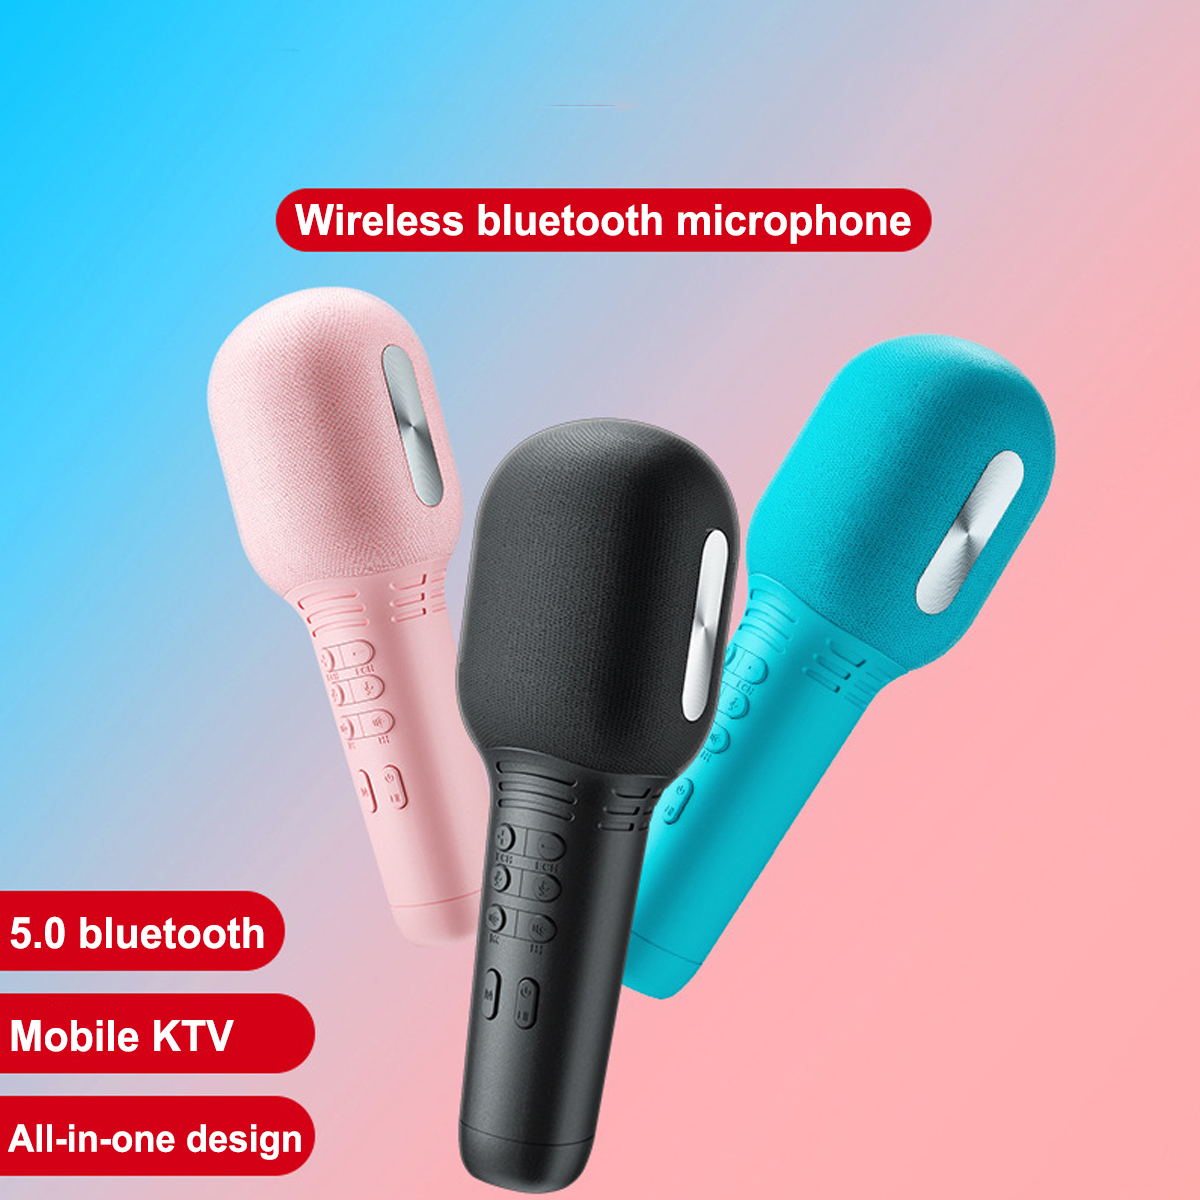 Wireless-Microphone-bluetooth-V50-Low-Latency-1800mAh-Battery-Portable-Audio-Video-Recording-Mic-for-1965351-1